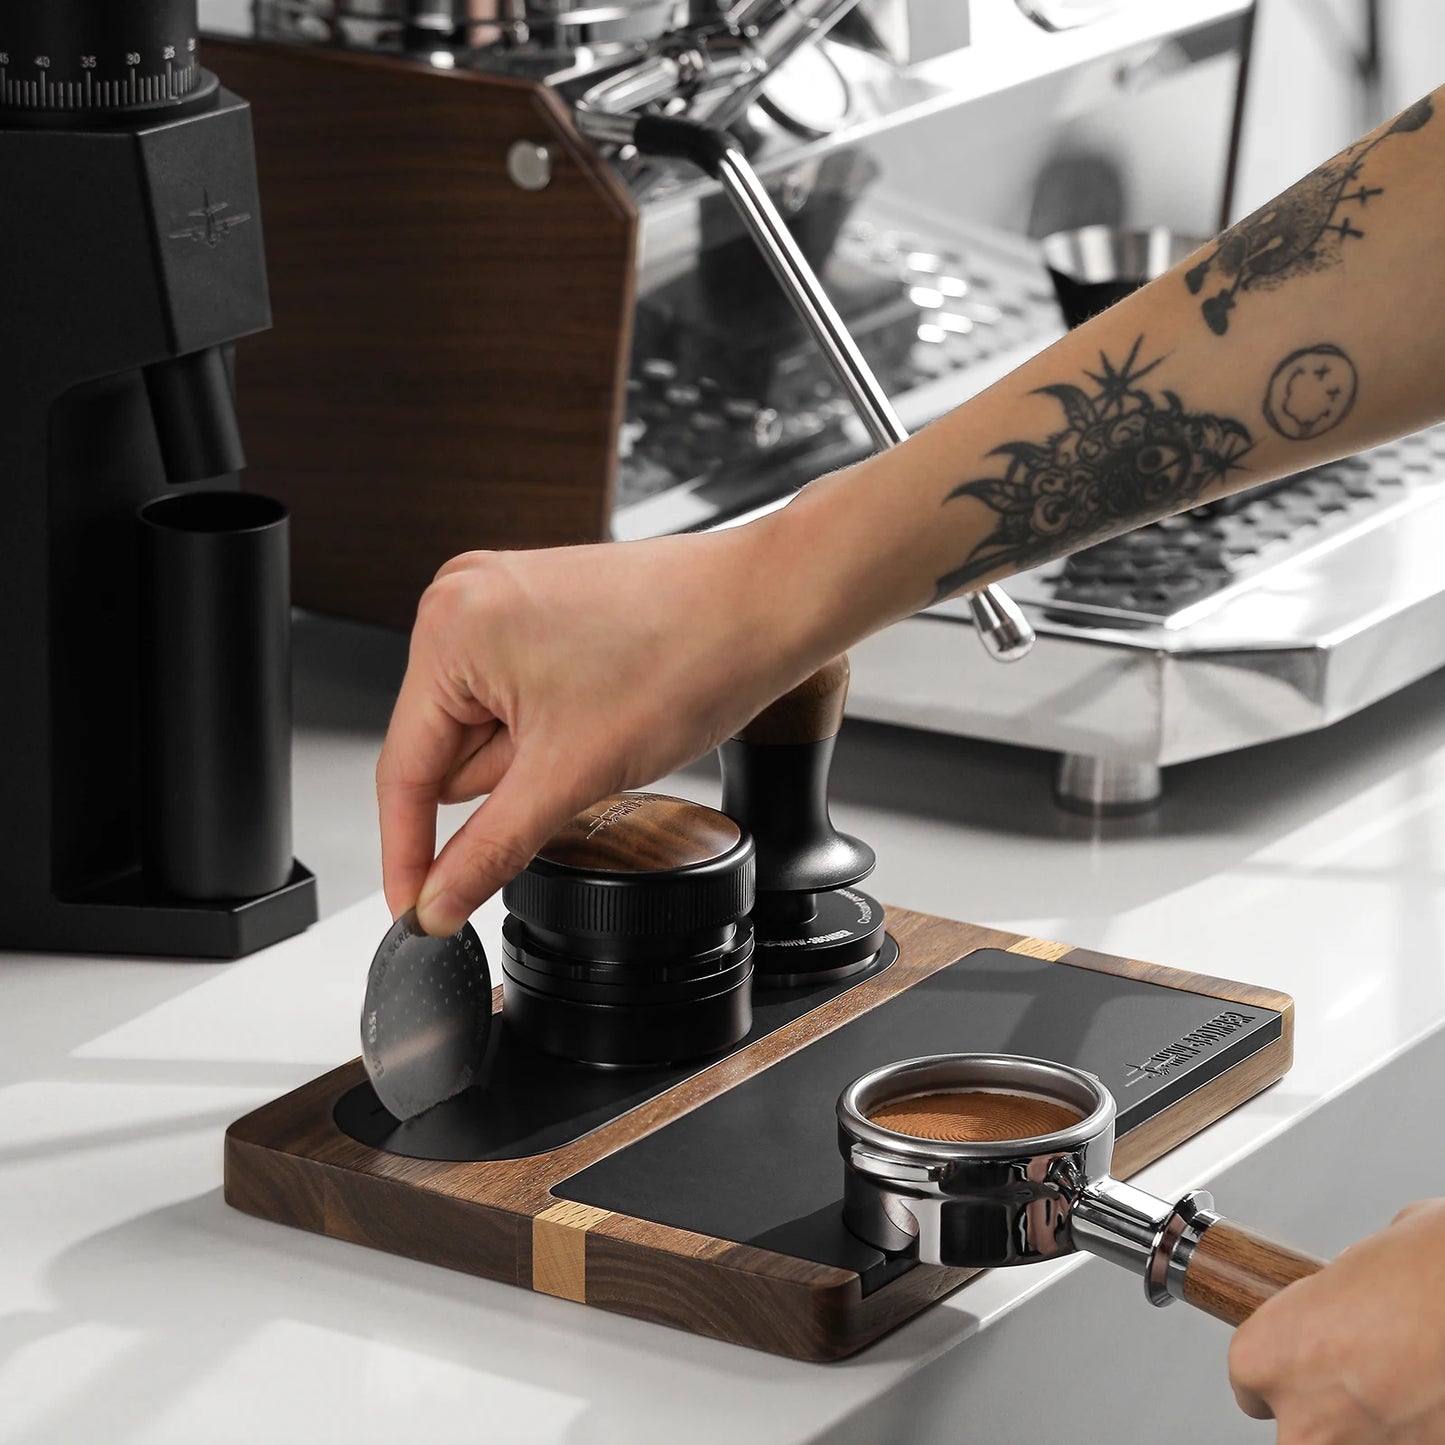 MHW-3BOMBER Espresso Tamping Station Food Grade Non-Slip Silicone Tamping Mat Tamper Stand Coffee Accessories 51-58mm Universal